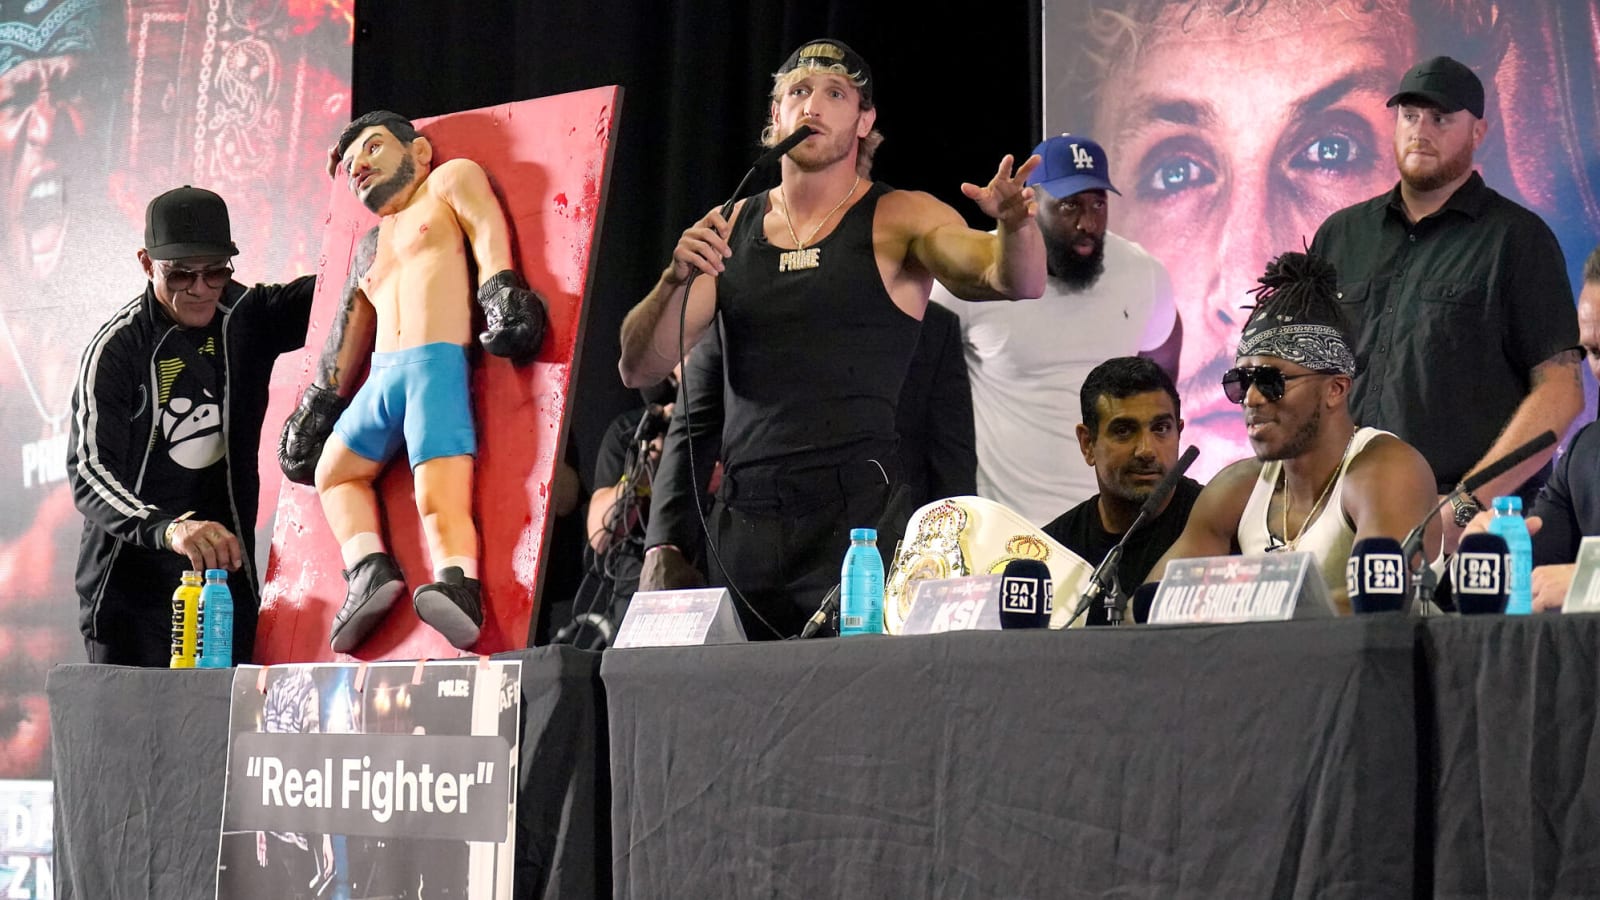 New angle shows the exact moment Logan Paul was cut by Dillon Danis and then hit with a bottle